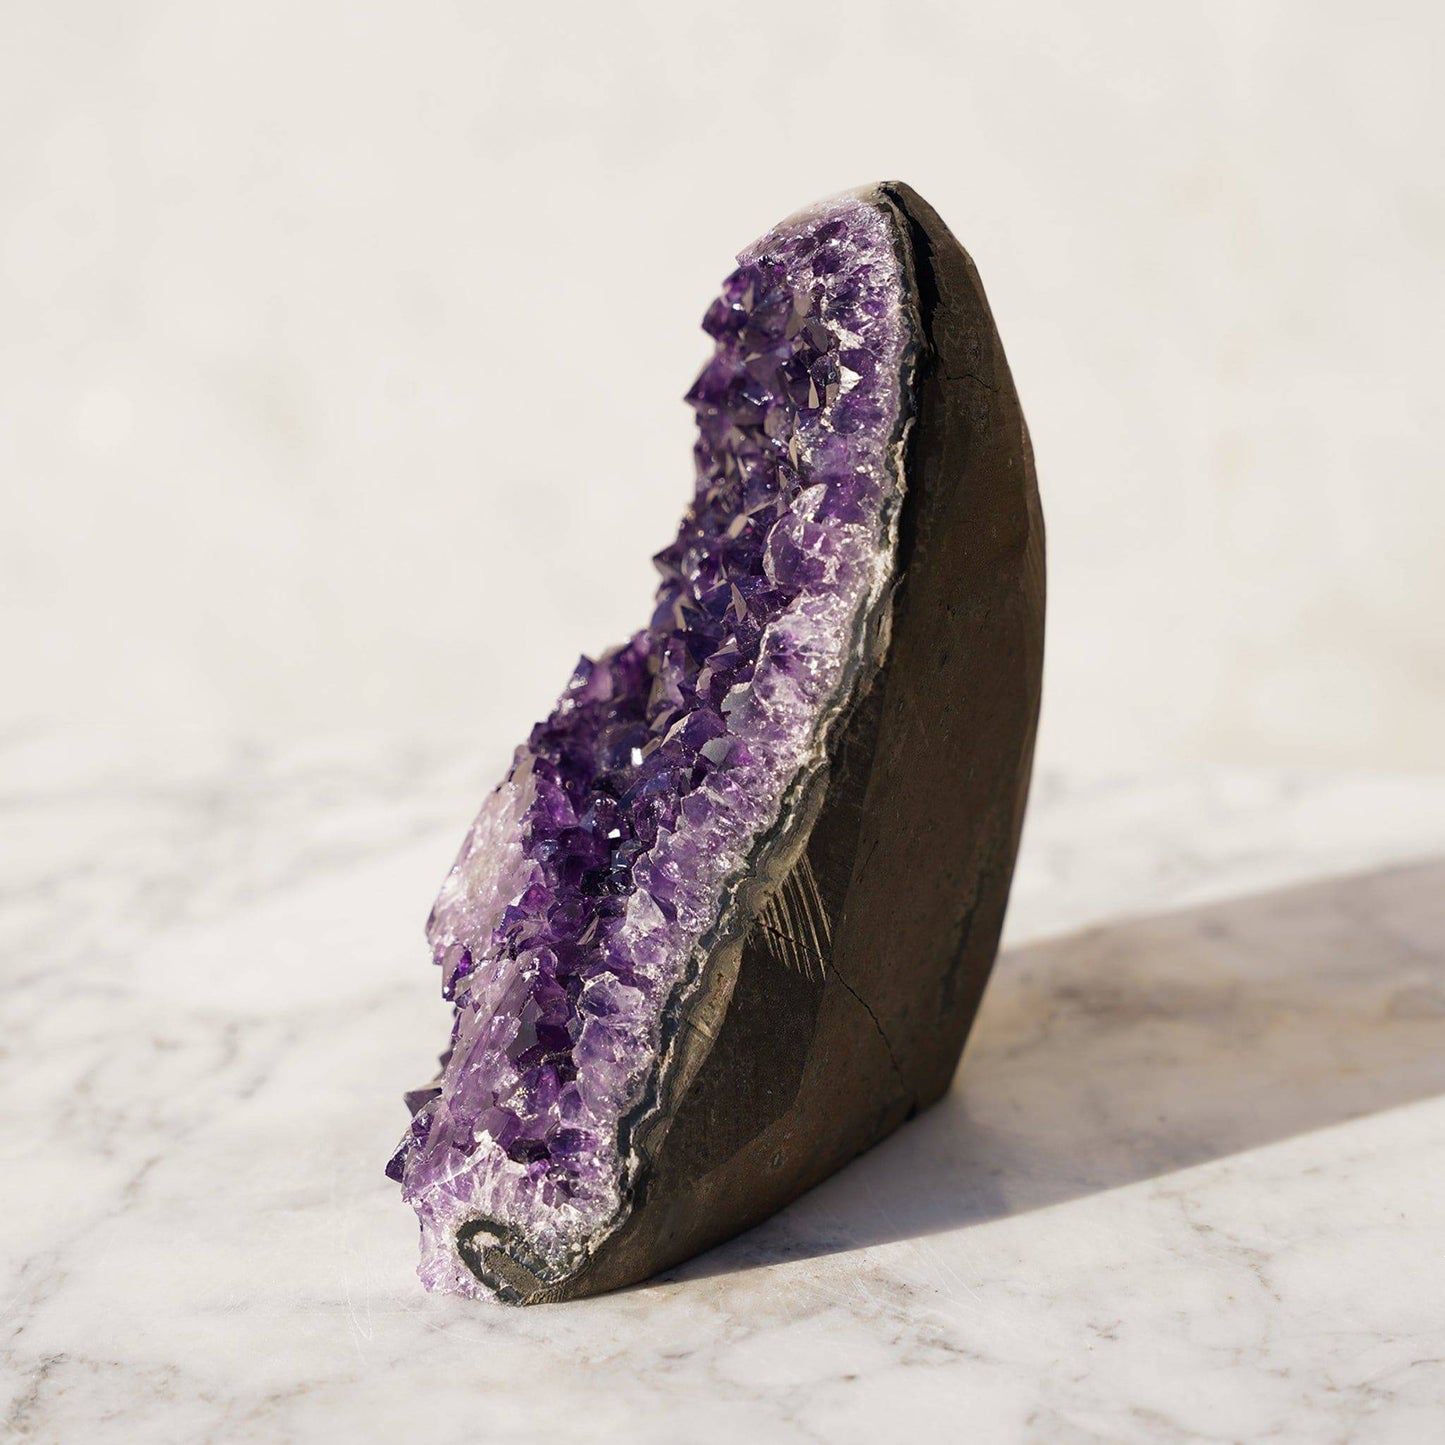 SIRIUS Rare shape amethyst geode for sale from Uruguay - Deepest Earth